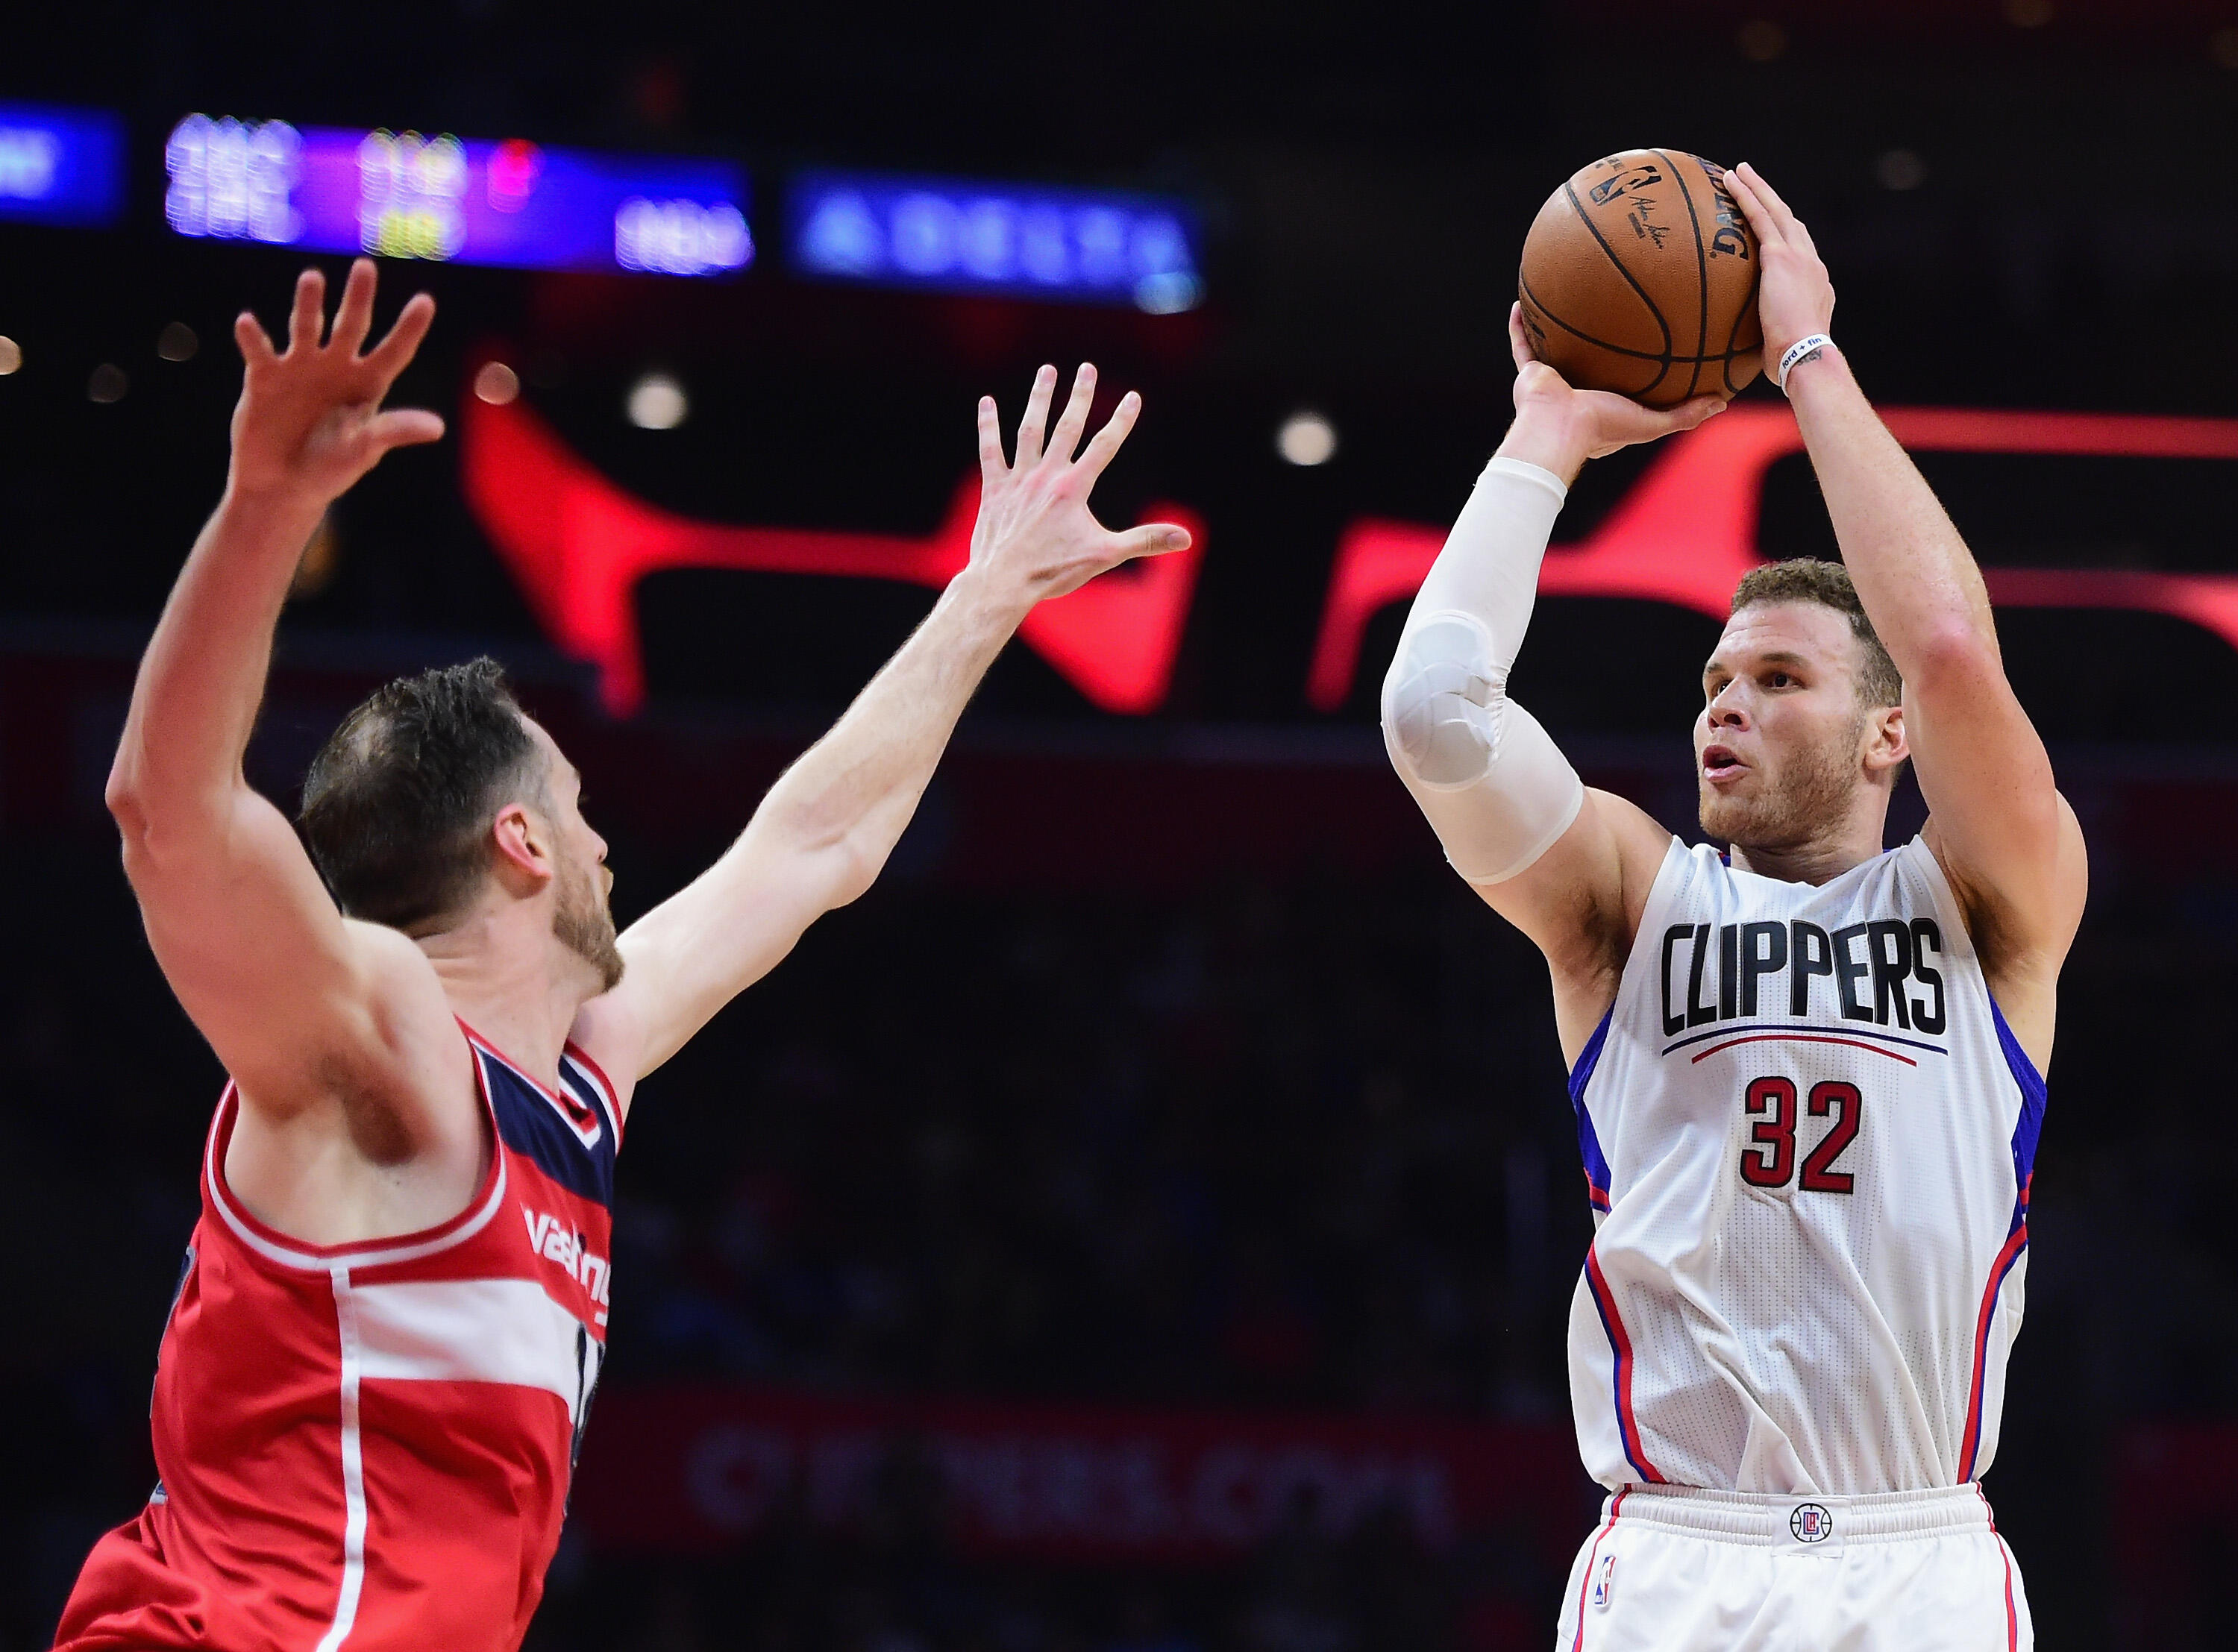 LOS ANGELES, CA - MARCH 29:  Blake Griffin #32 of the LA Clippers scores on a jumper in front of Jason Smith #14 of the Washington Wizards during a 133-124 Clipper win at Staples Center on March 29, 2017 in Los Angeles, California.  NOTE TO USER: User exp